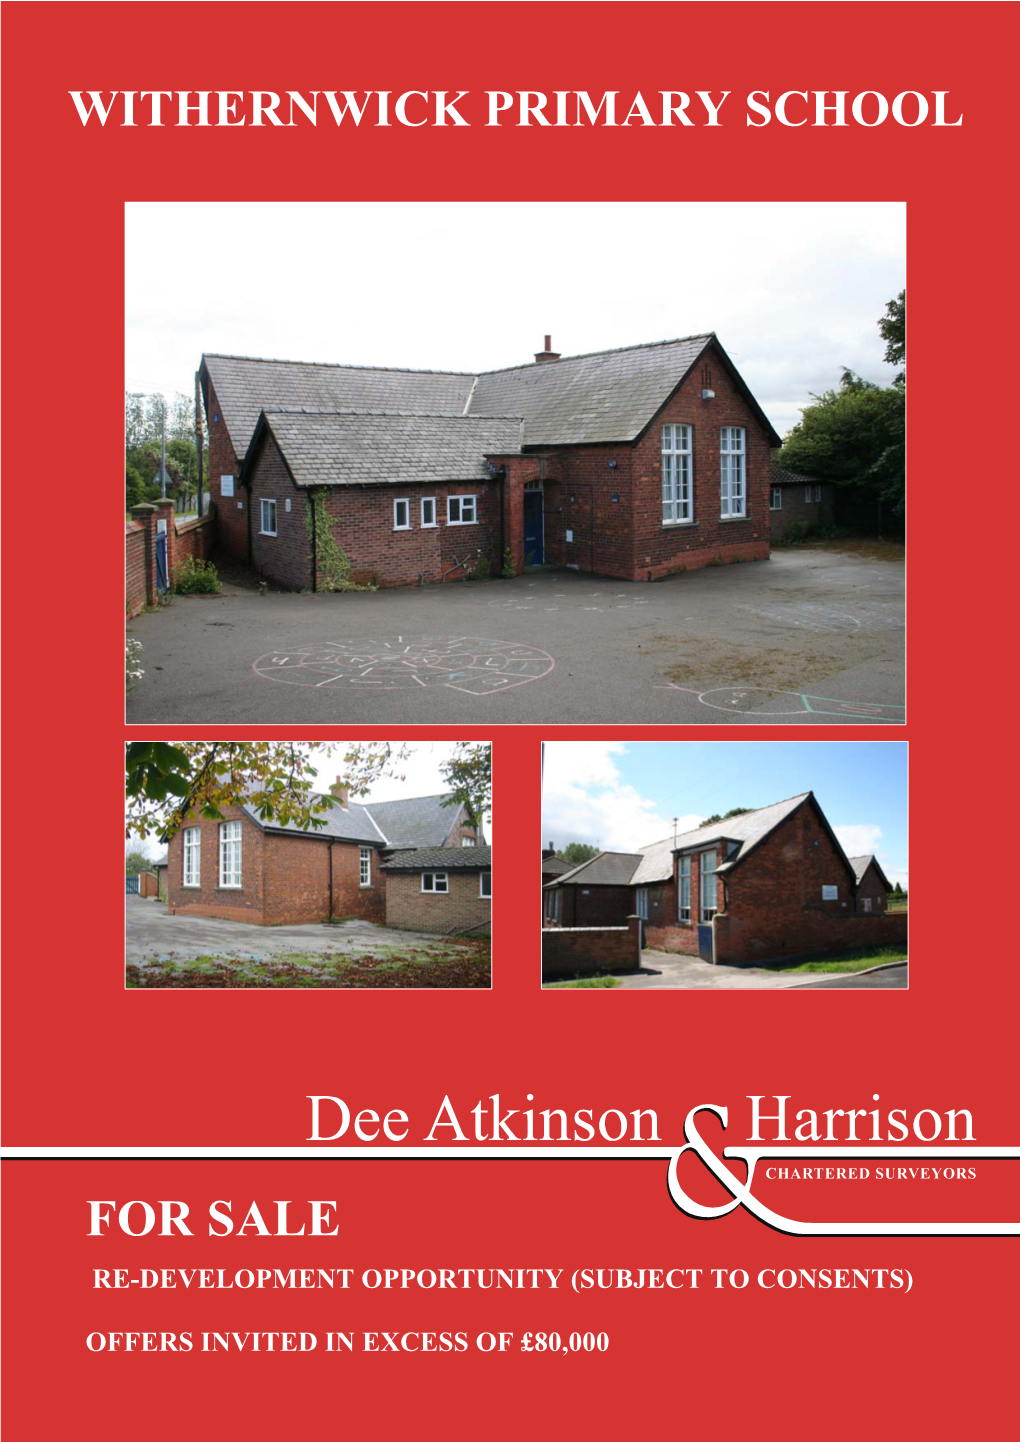 Withernwick Primary School for Sale